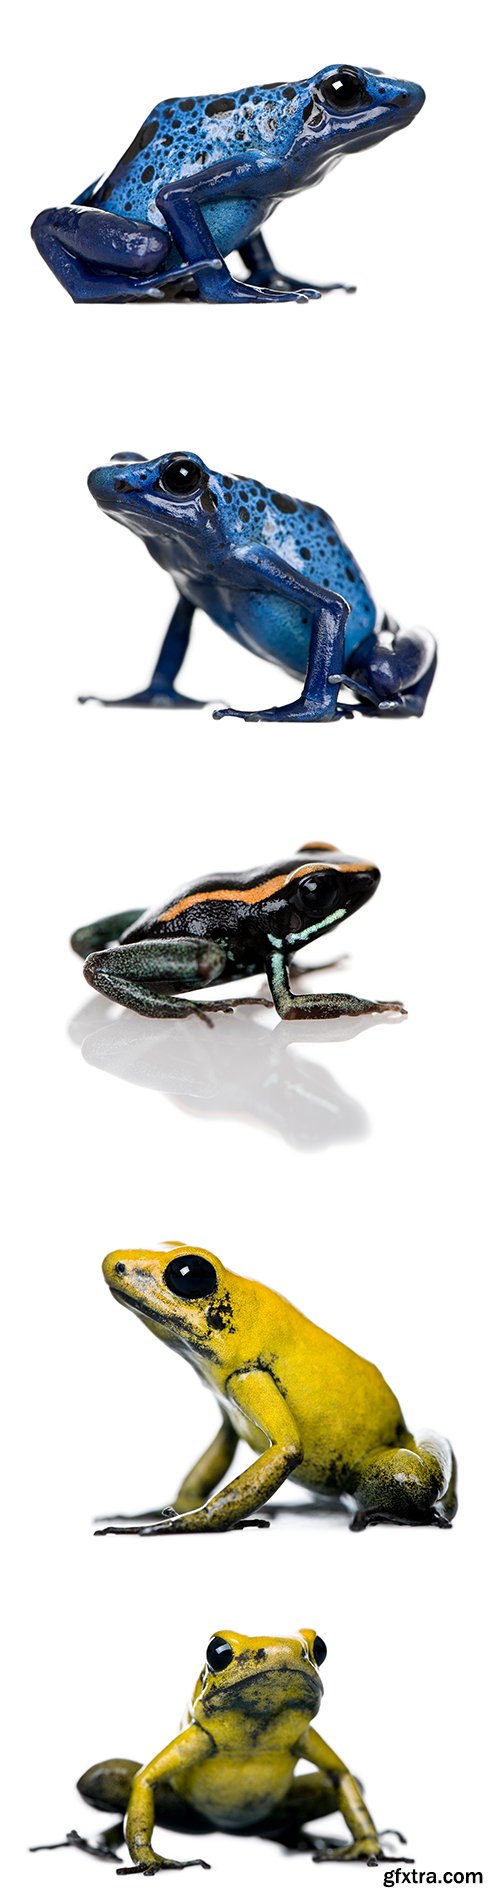 Colorful Poison Frog Isolated - 11xJPGs